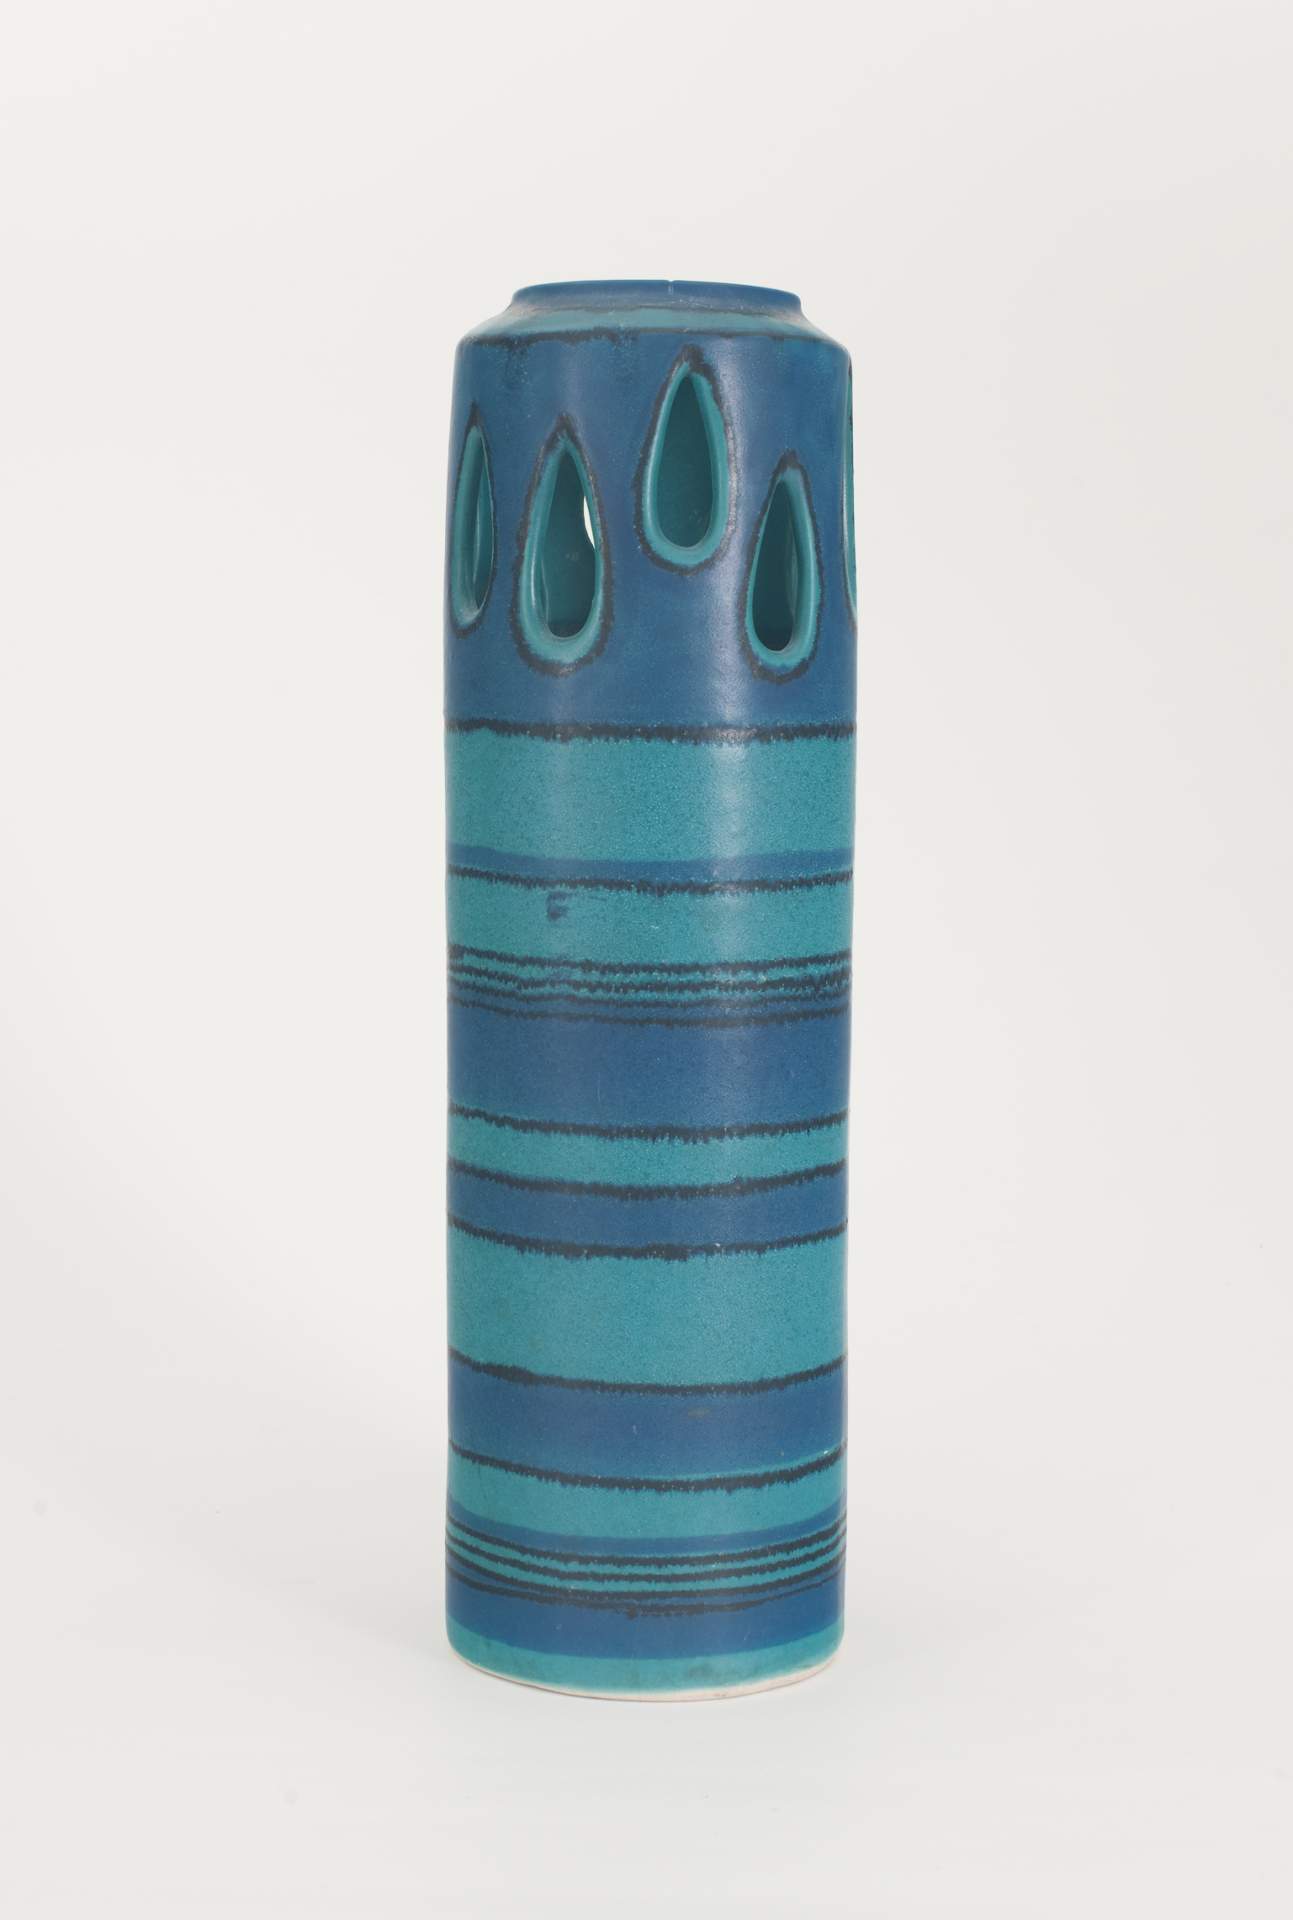 Artware Cylindrical Vase with Perforations